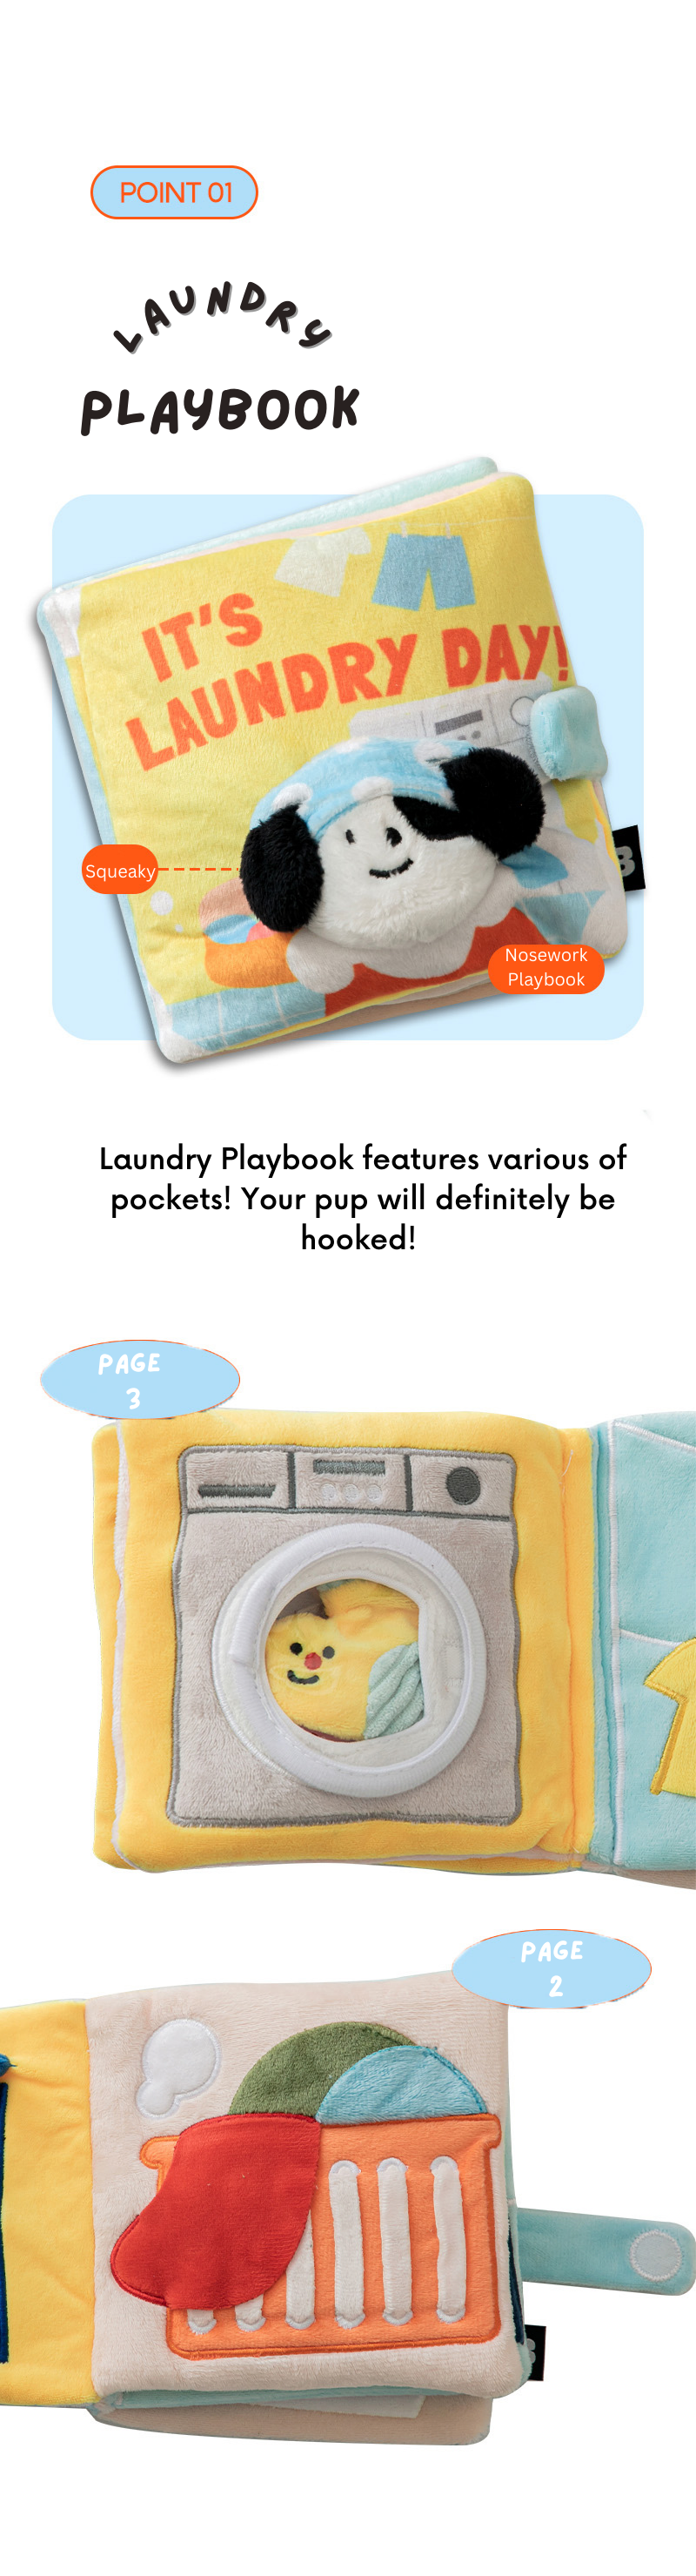 Laundry Day Playbook